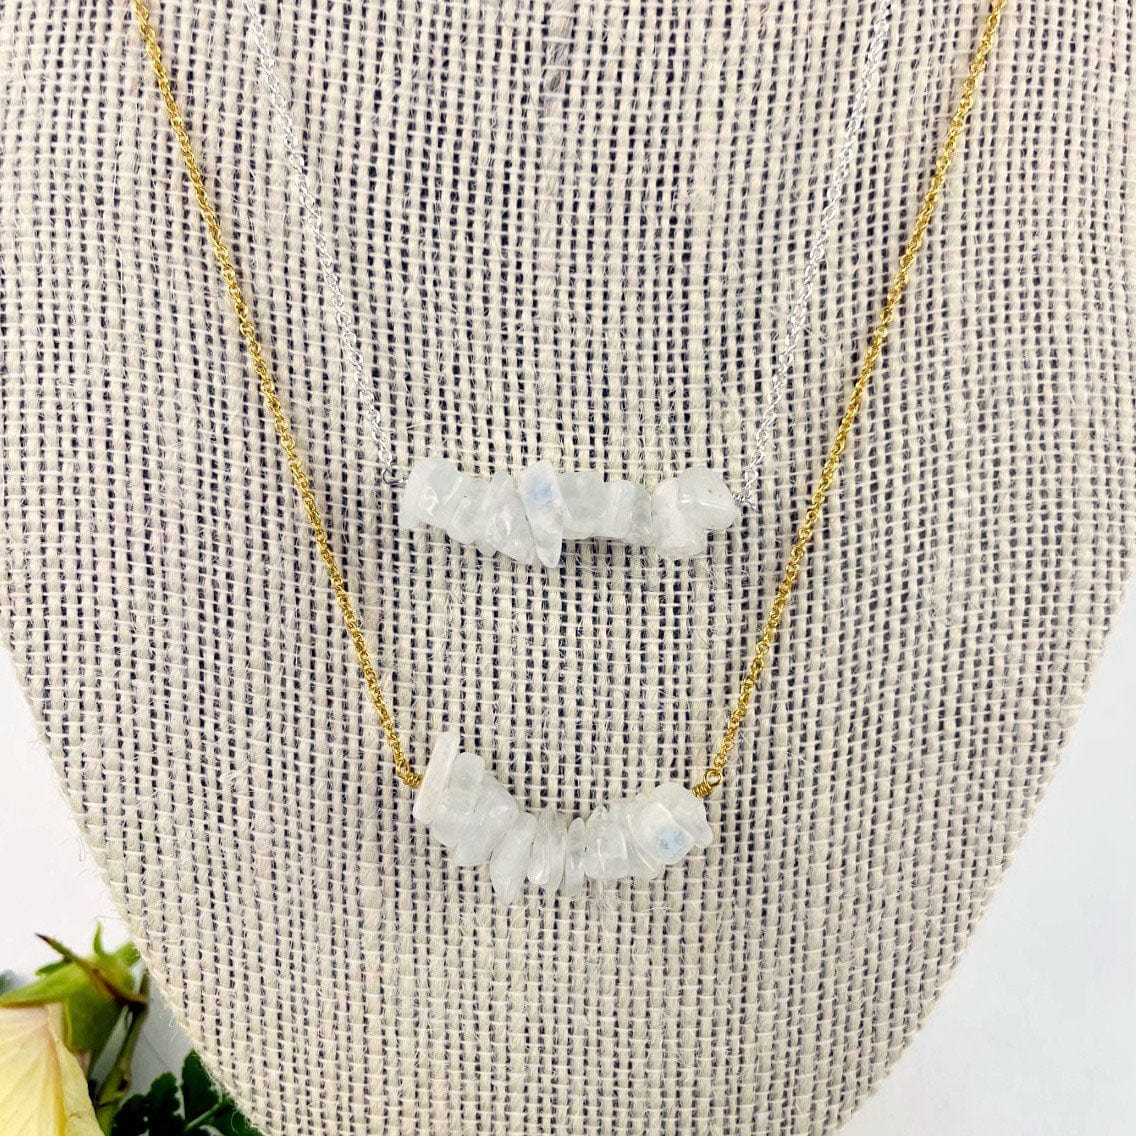 Moonstone Stone Necklace - June Birthstone - Gold over Sterling or Sterling Silver Adjustable Length shown upclose